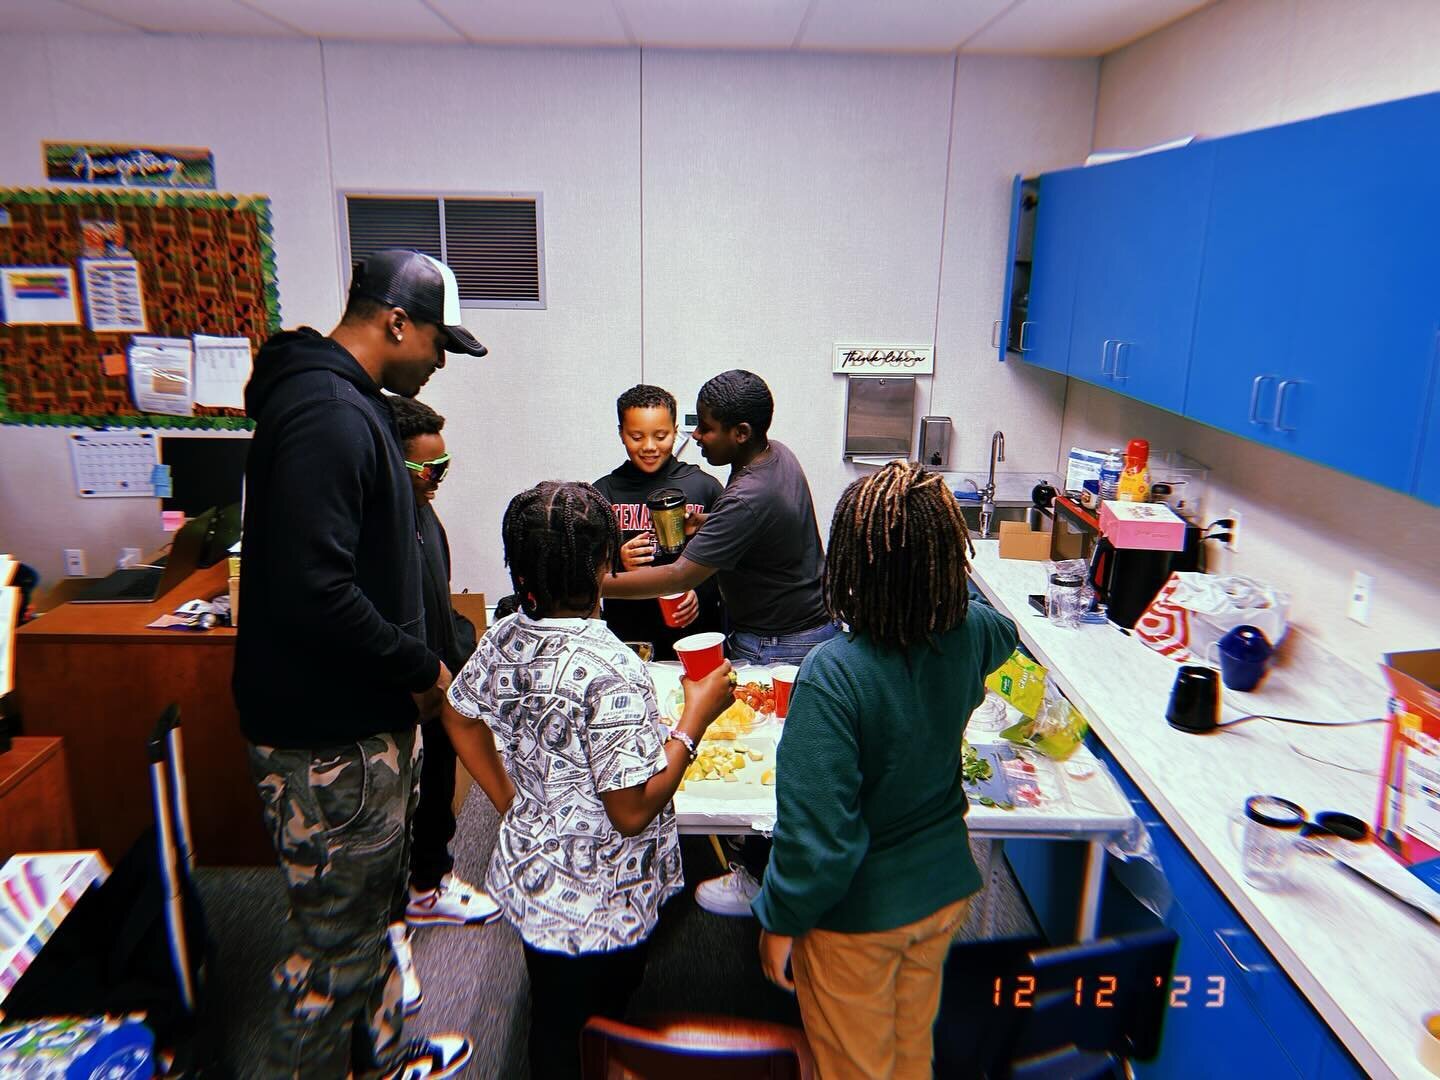 Empowering the next generation to thrive! Our youth empowerment program recently picked up and we are excited to pour into these bright students yet again. We kickstarted their journey to well-being in our program by blending nutrition education with